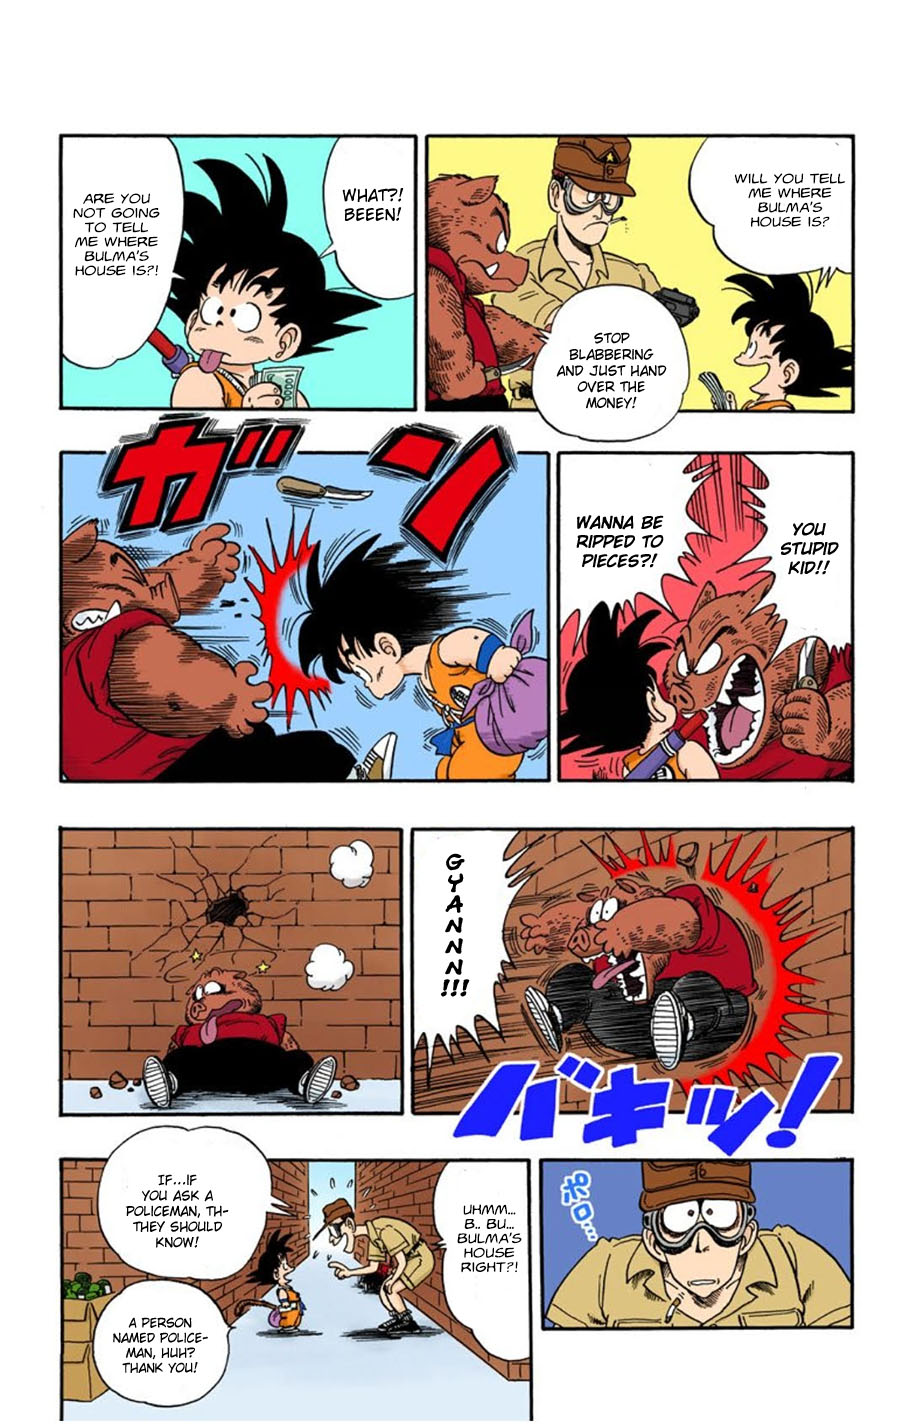 Dragon Ball Full Color Edition Vol. 6 Ch. 68 Bulma's House in West City